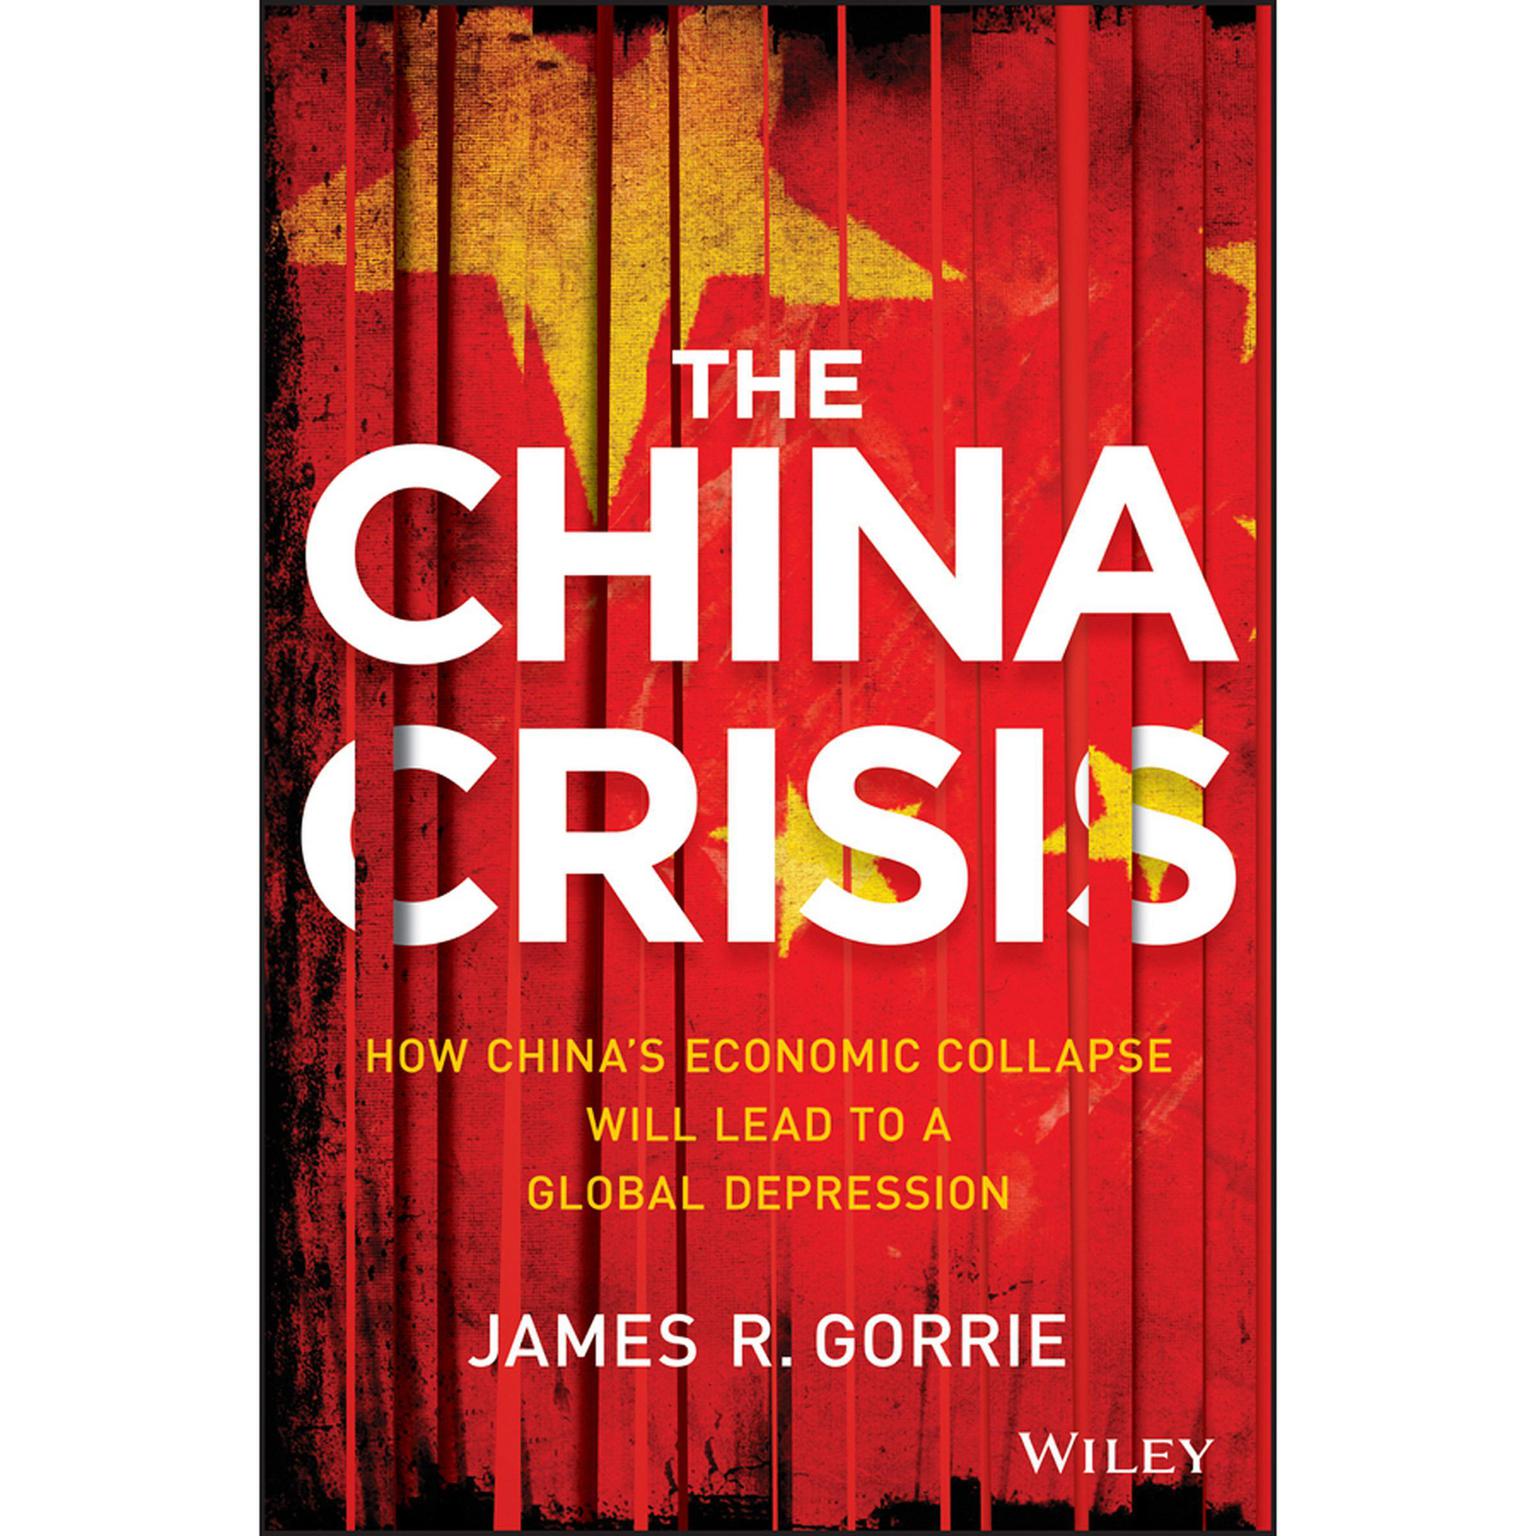 The China Crisis: How Chinas Economic Collapse Will Lead to a Global Depression Audiobook, by James R. Gorrie